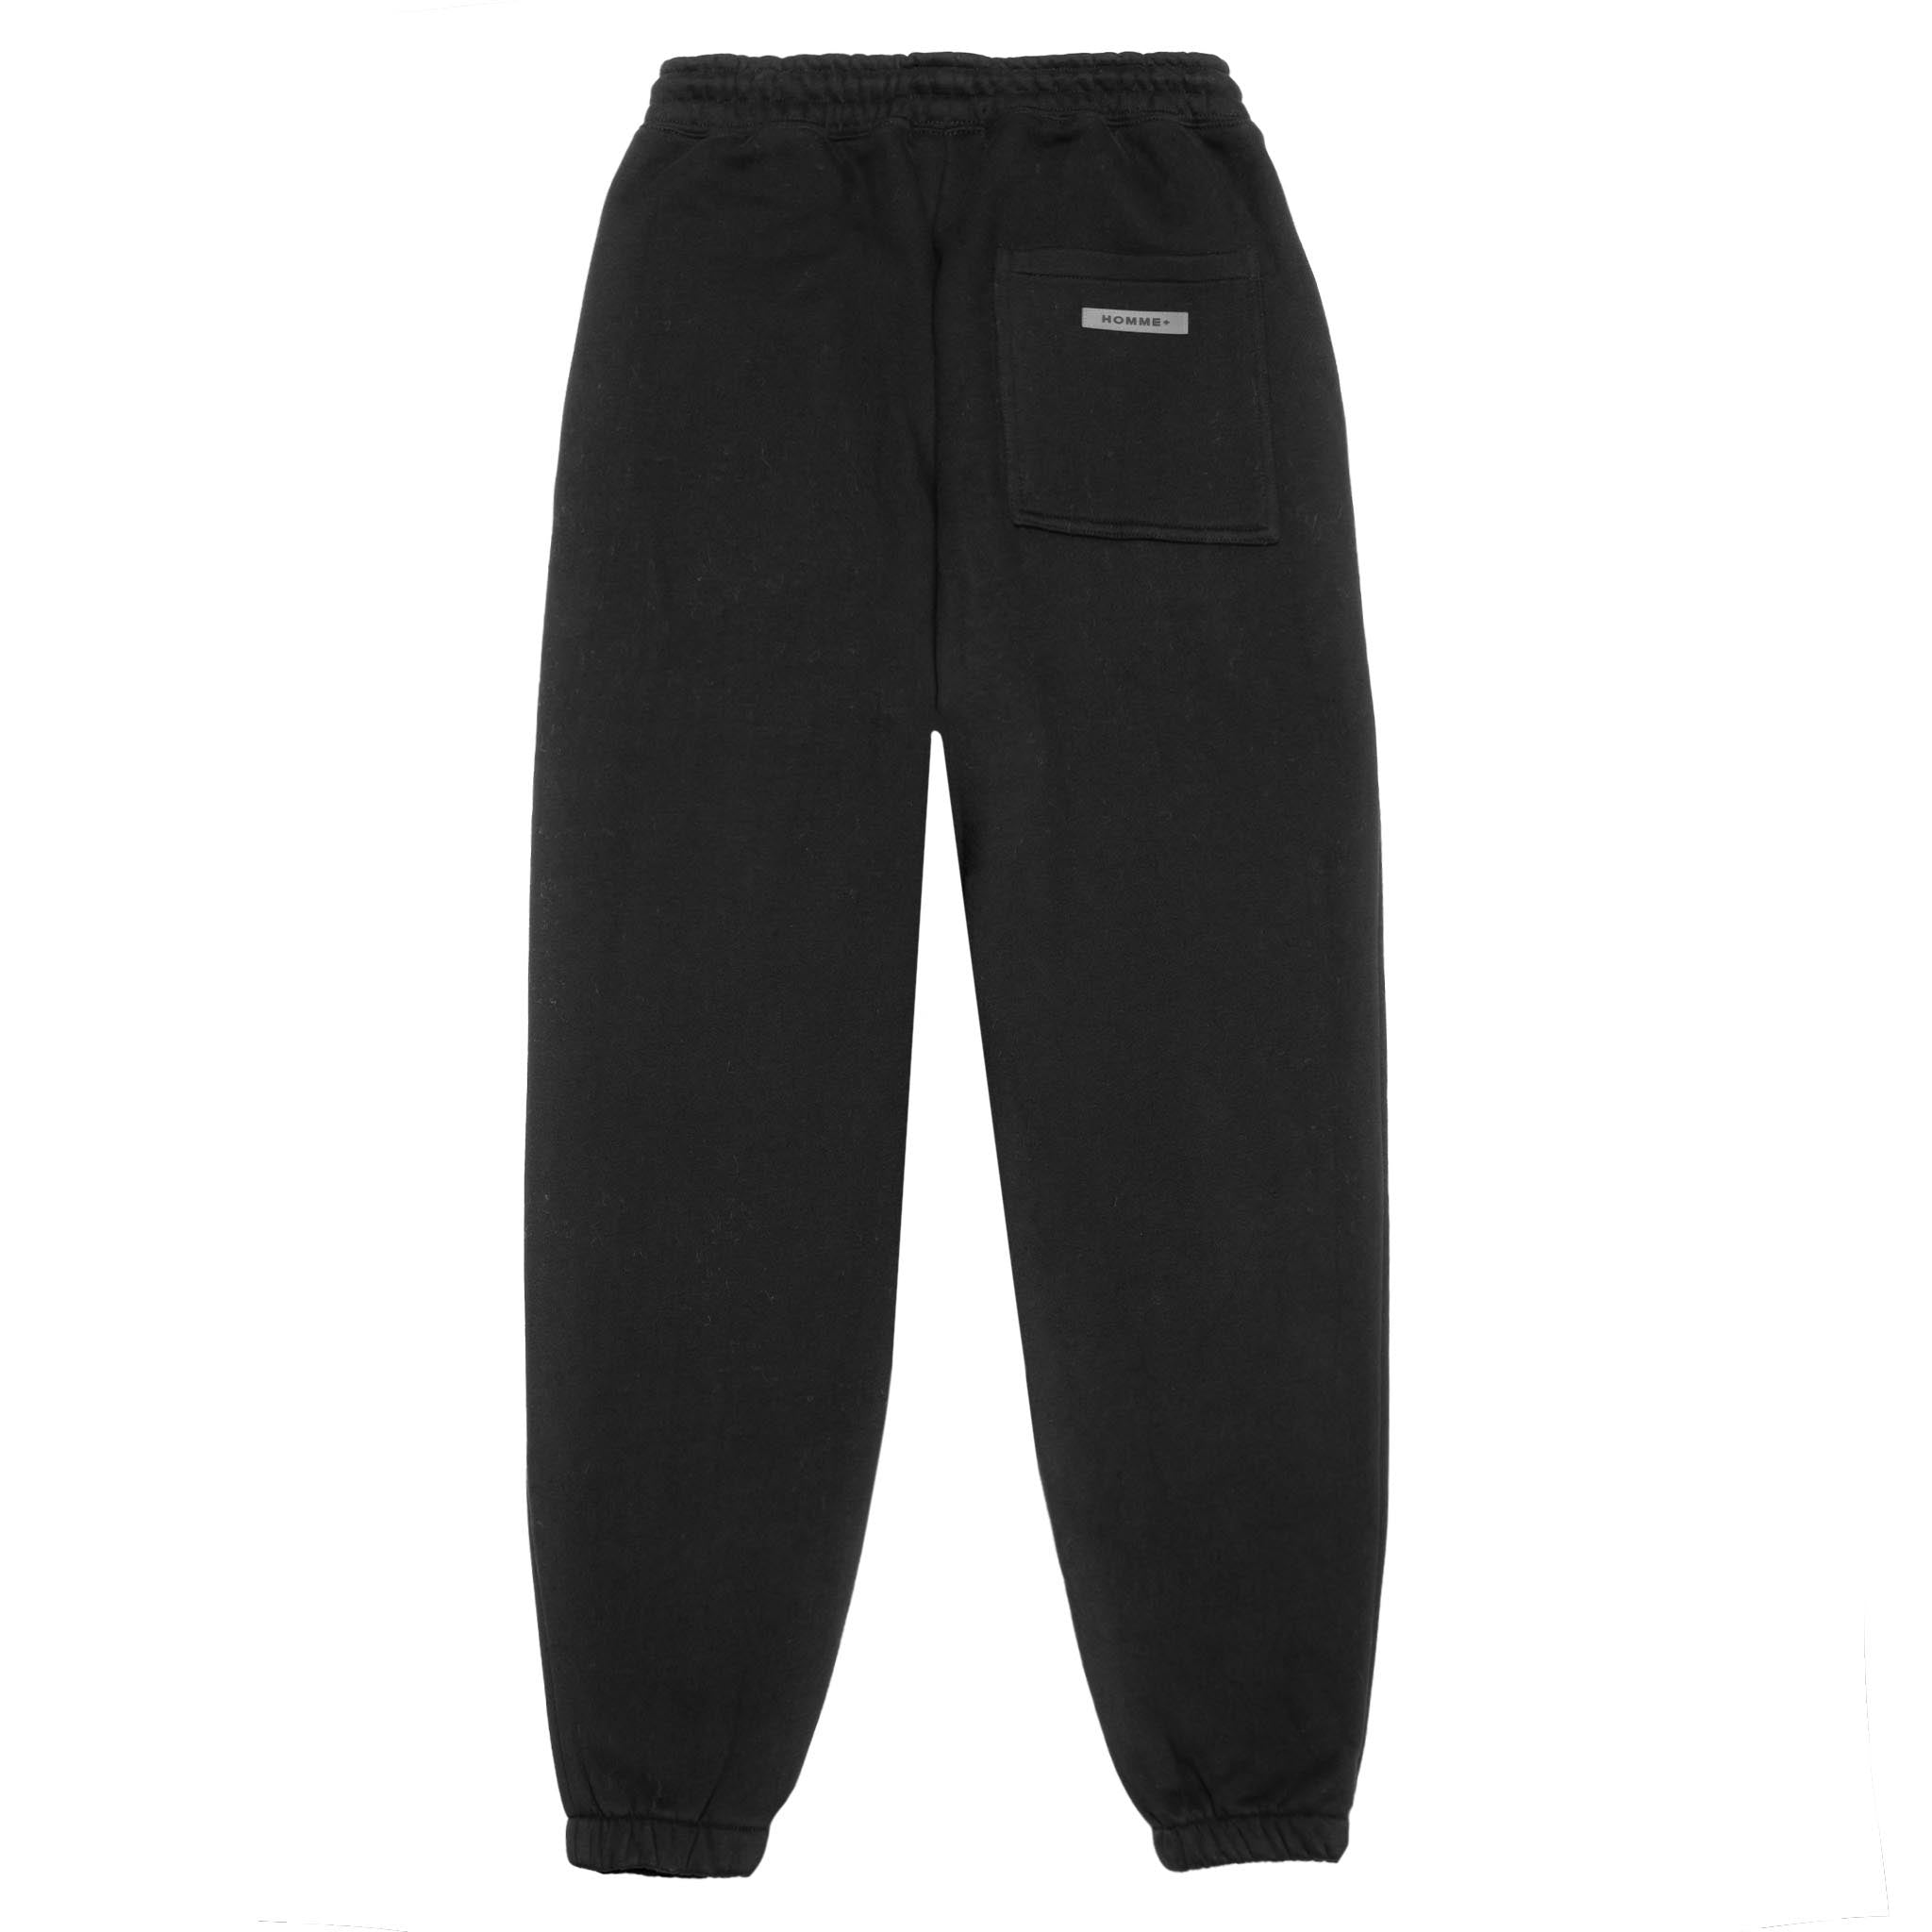 HOMME+ ESSENTIAL By Homme Jogger Black